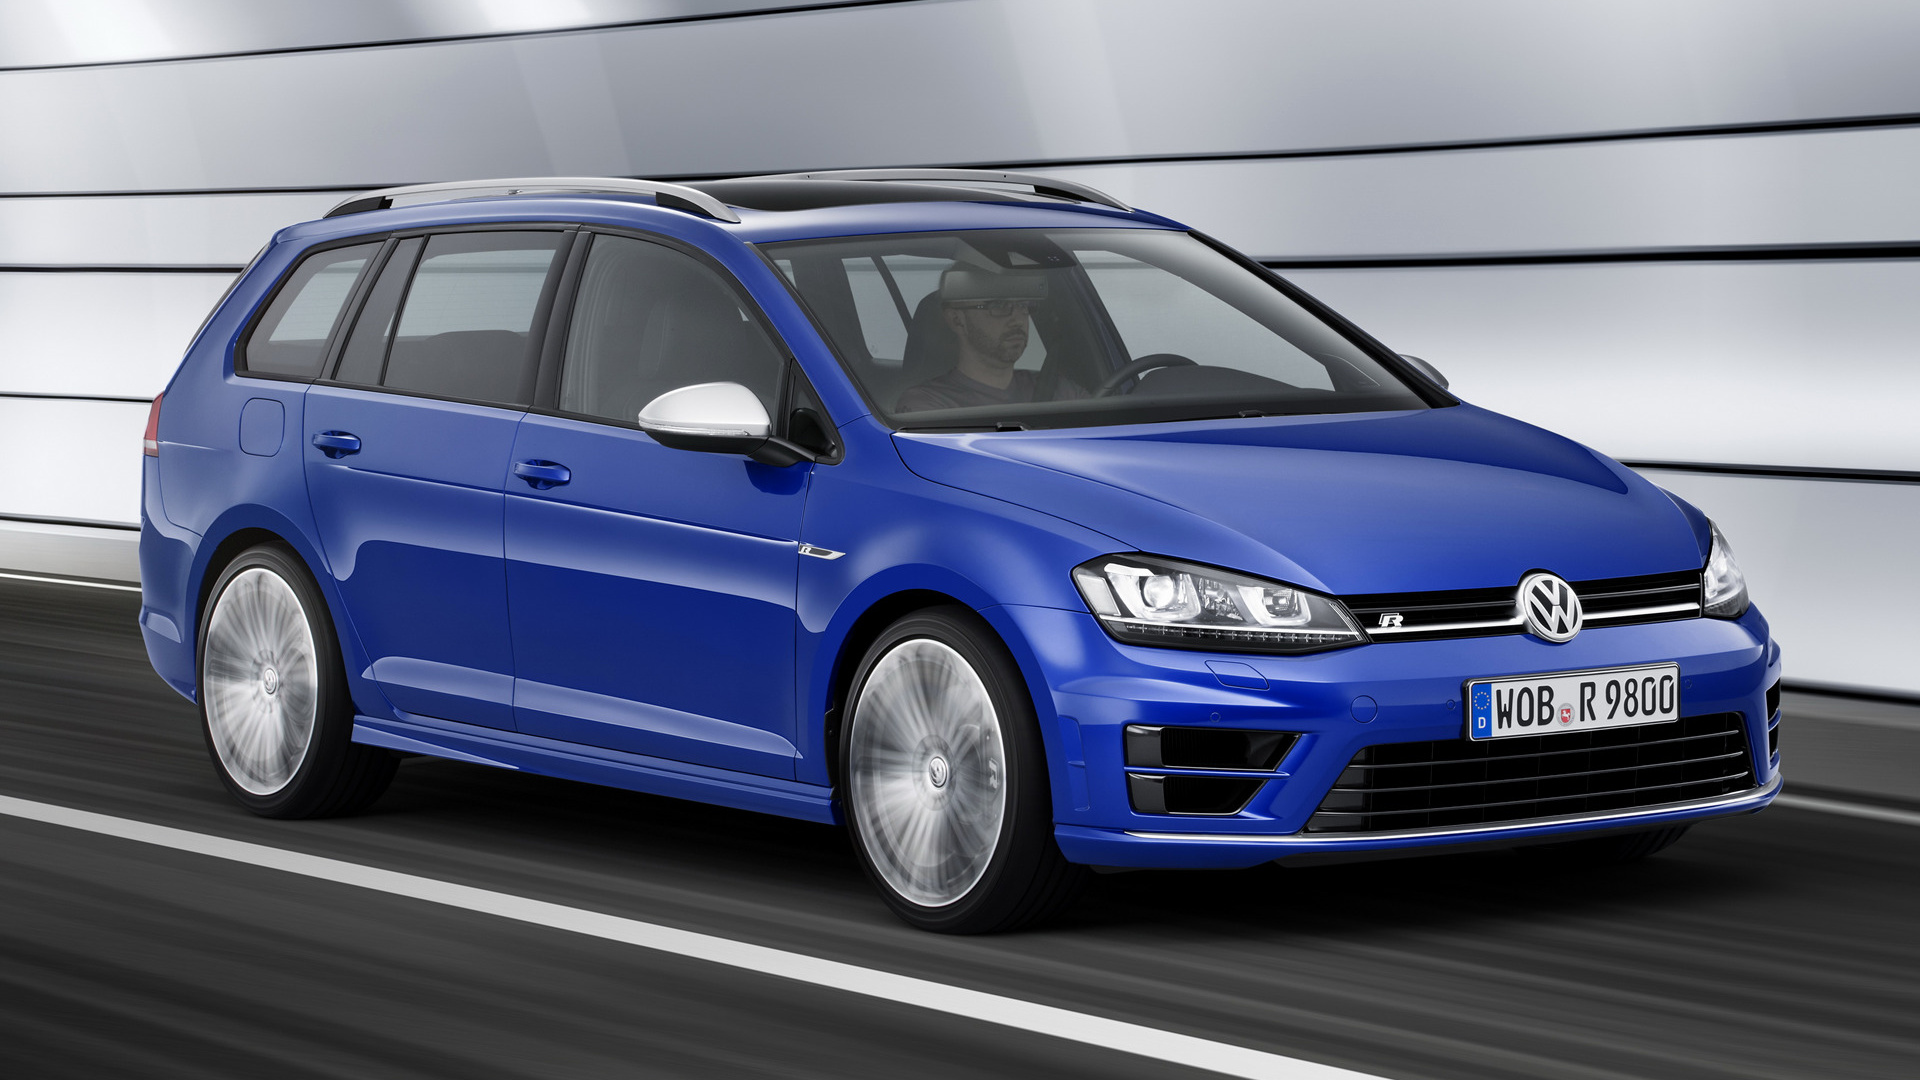 Volkswagen Golf R Variant Wallpapers and HD Images